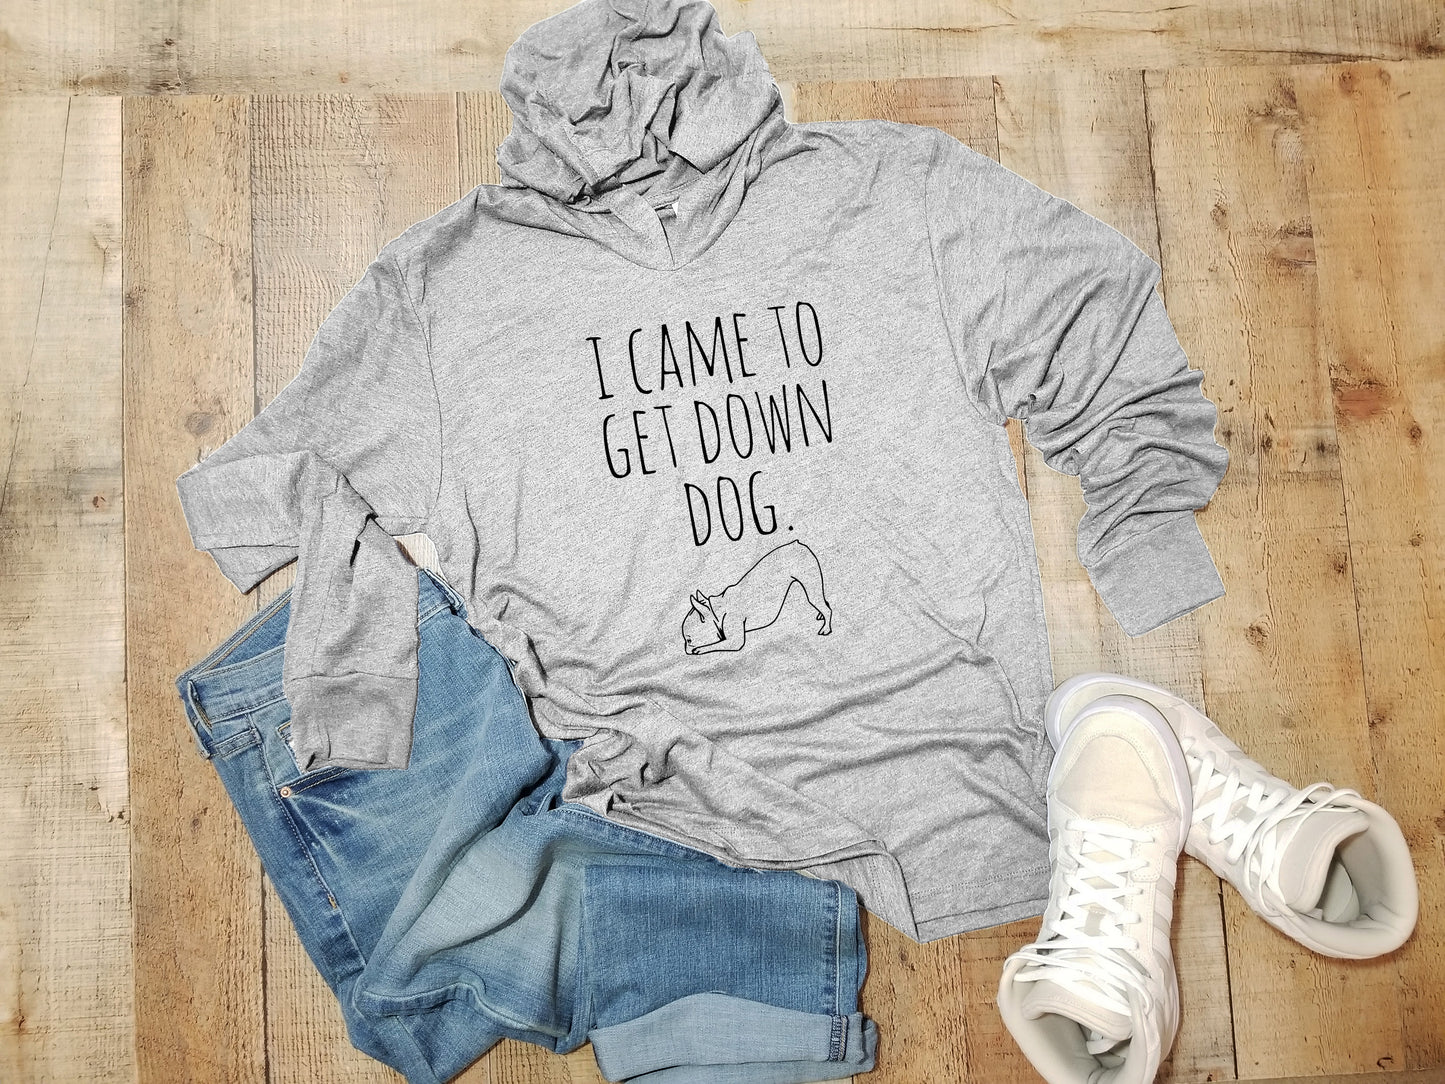 I Came To Get Down Dog (Yoga/ French Bulldog) - Unisex T-Shirt Hoodie - Heather Gray